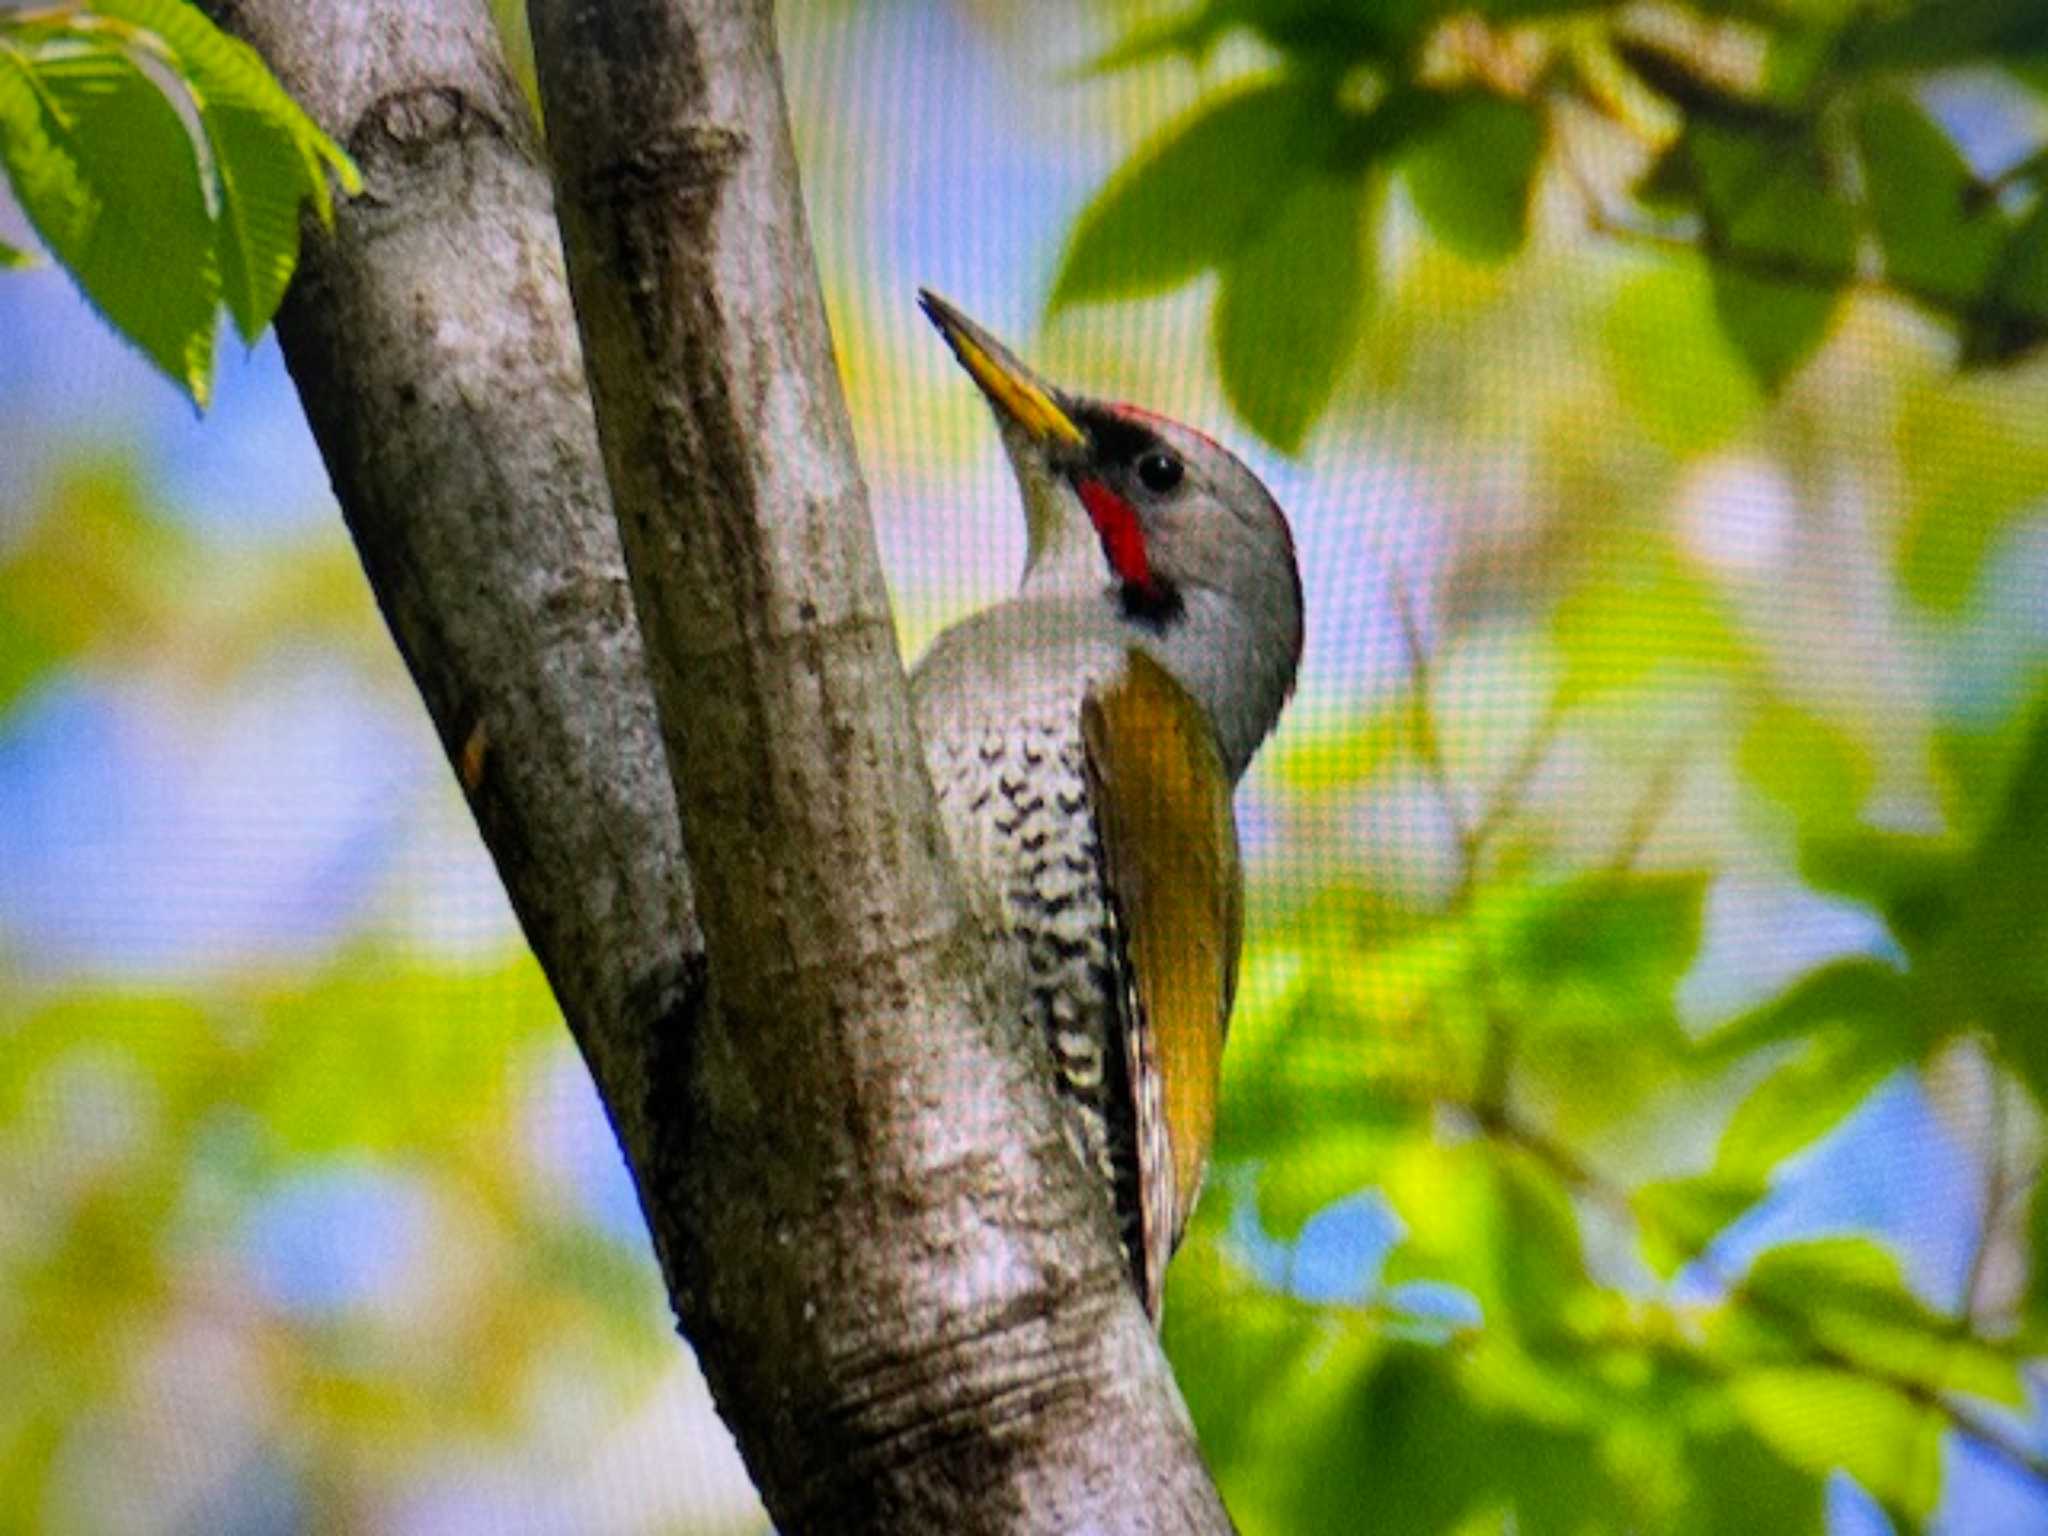 Photo of Japanese Green Woodpecker at Saitama Prefecture Forest Park by ゆるゆるとりみんgoo